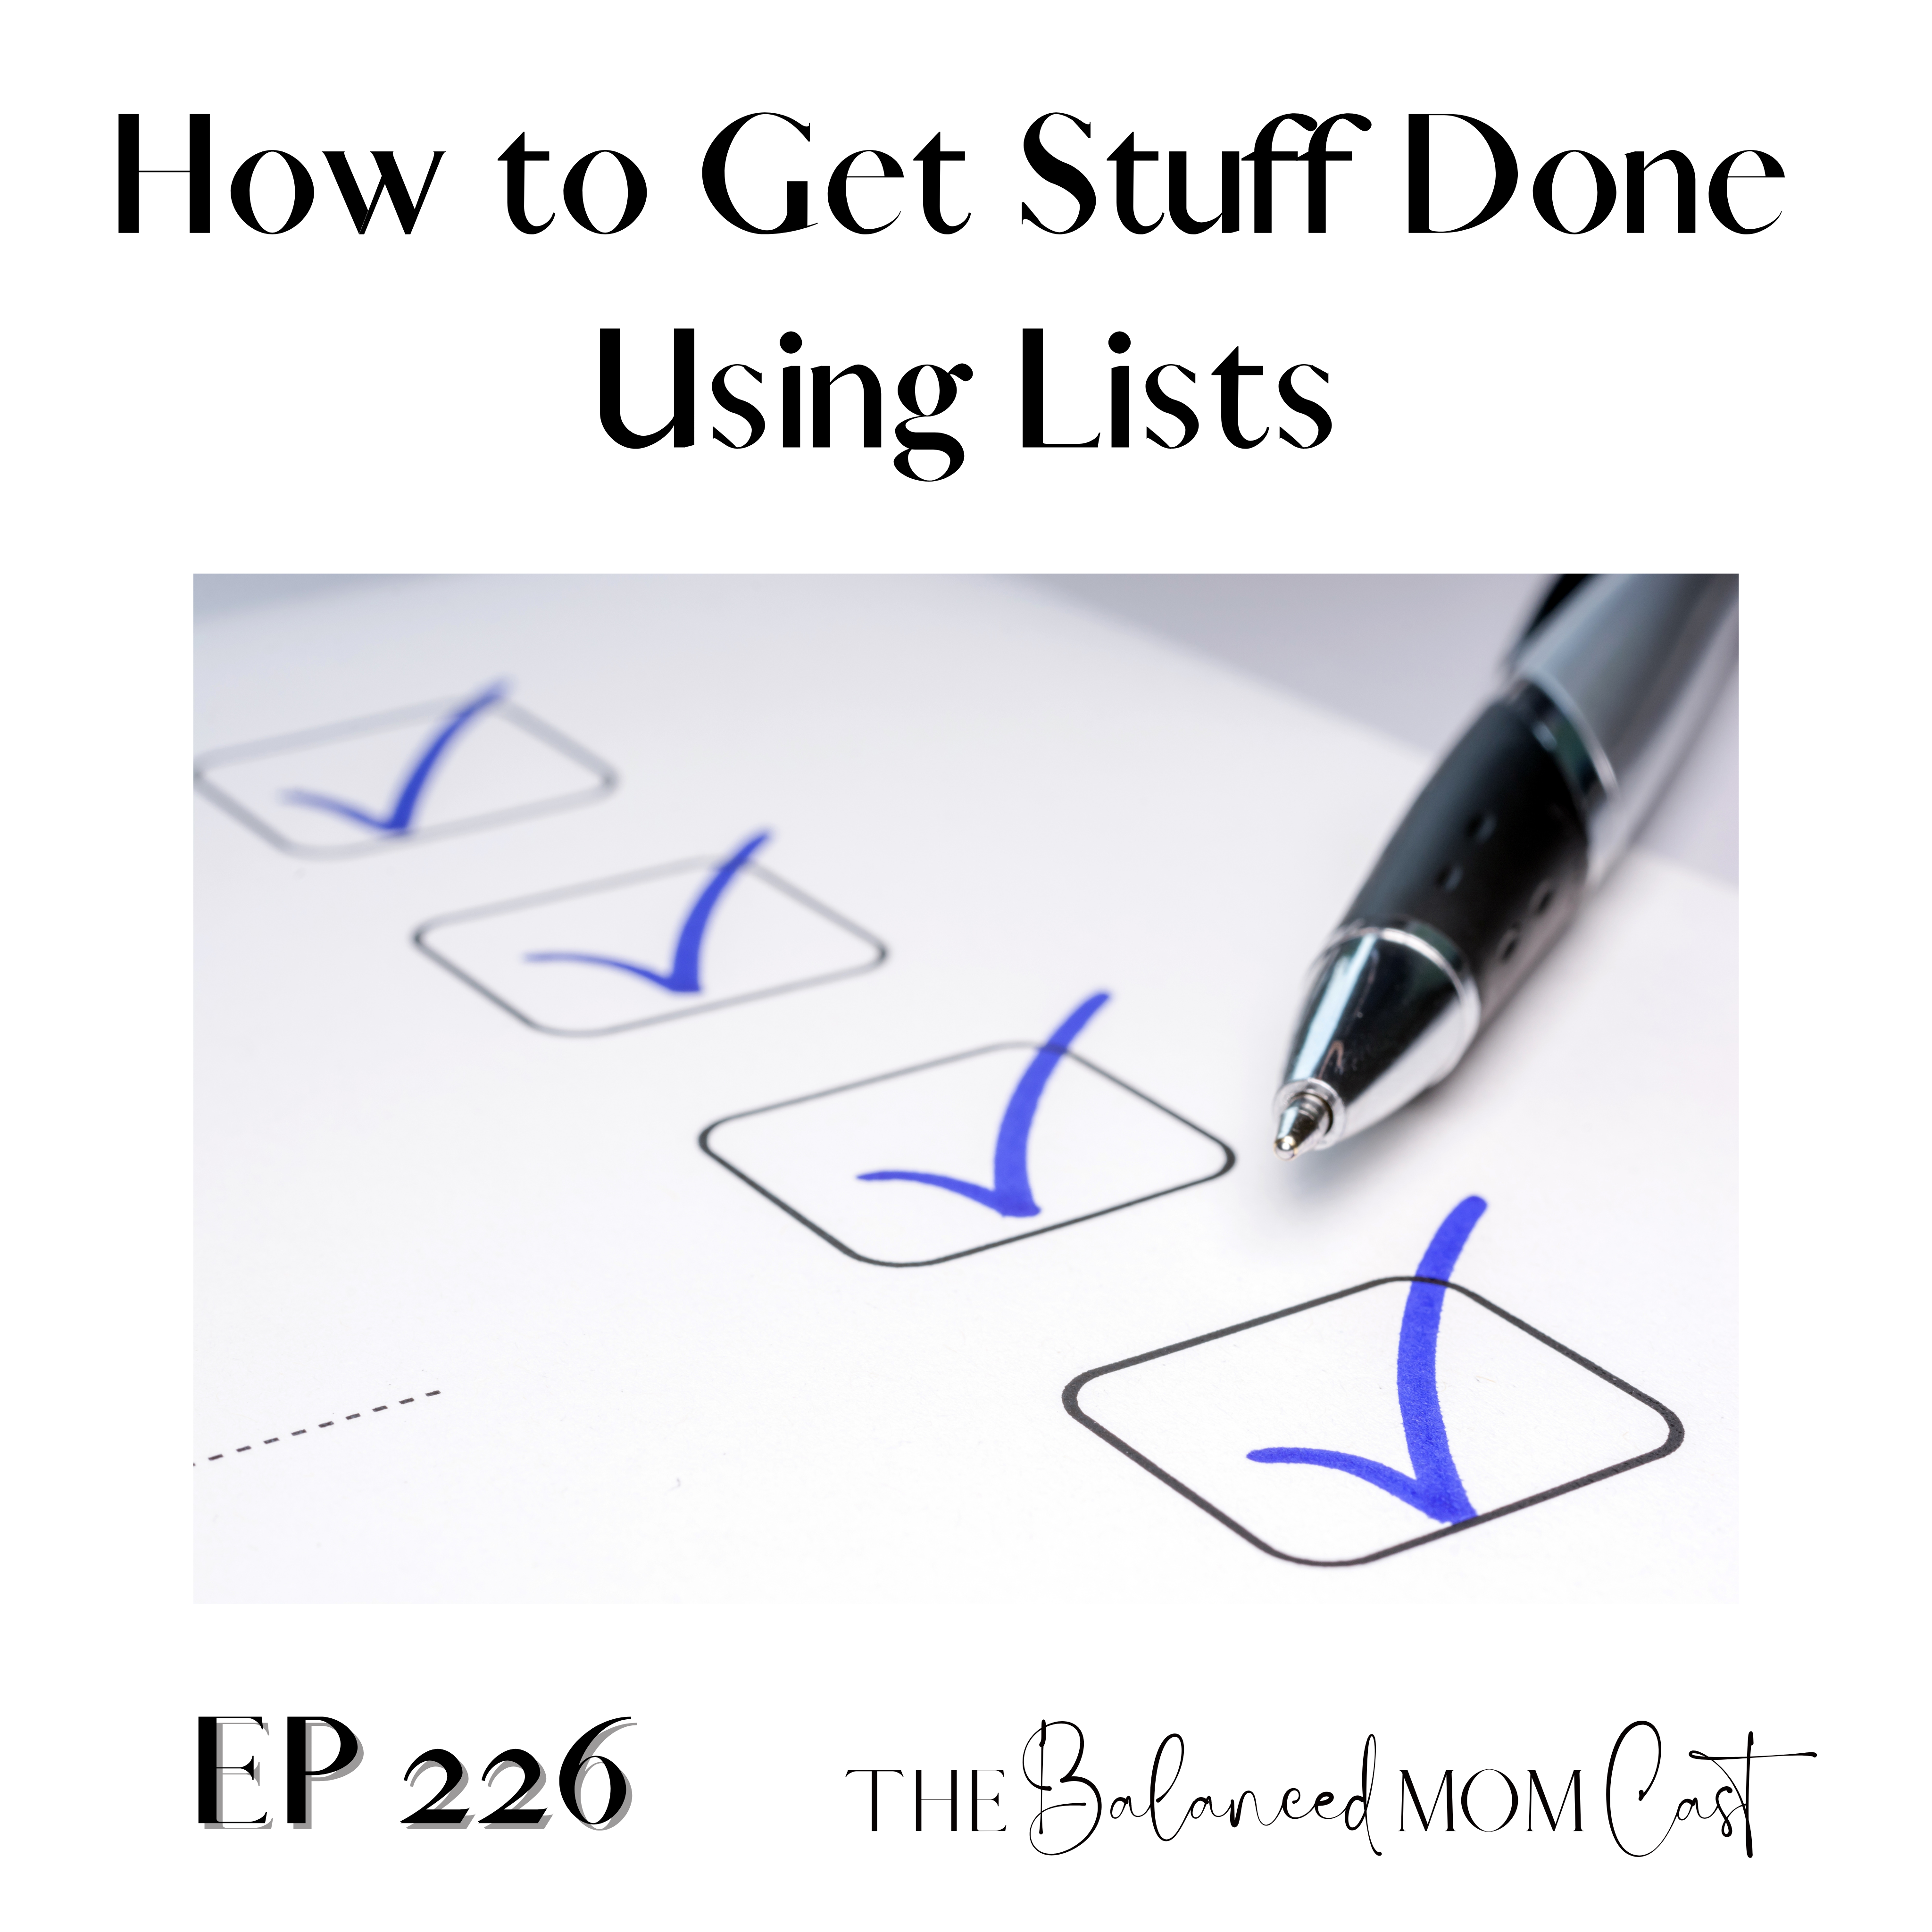 Ep 226: How to Get Stuff Done Using Lists